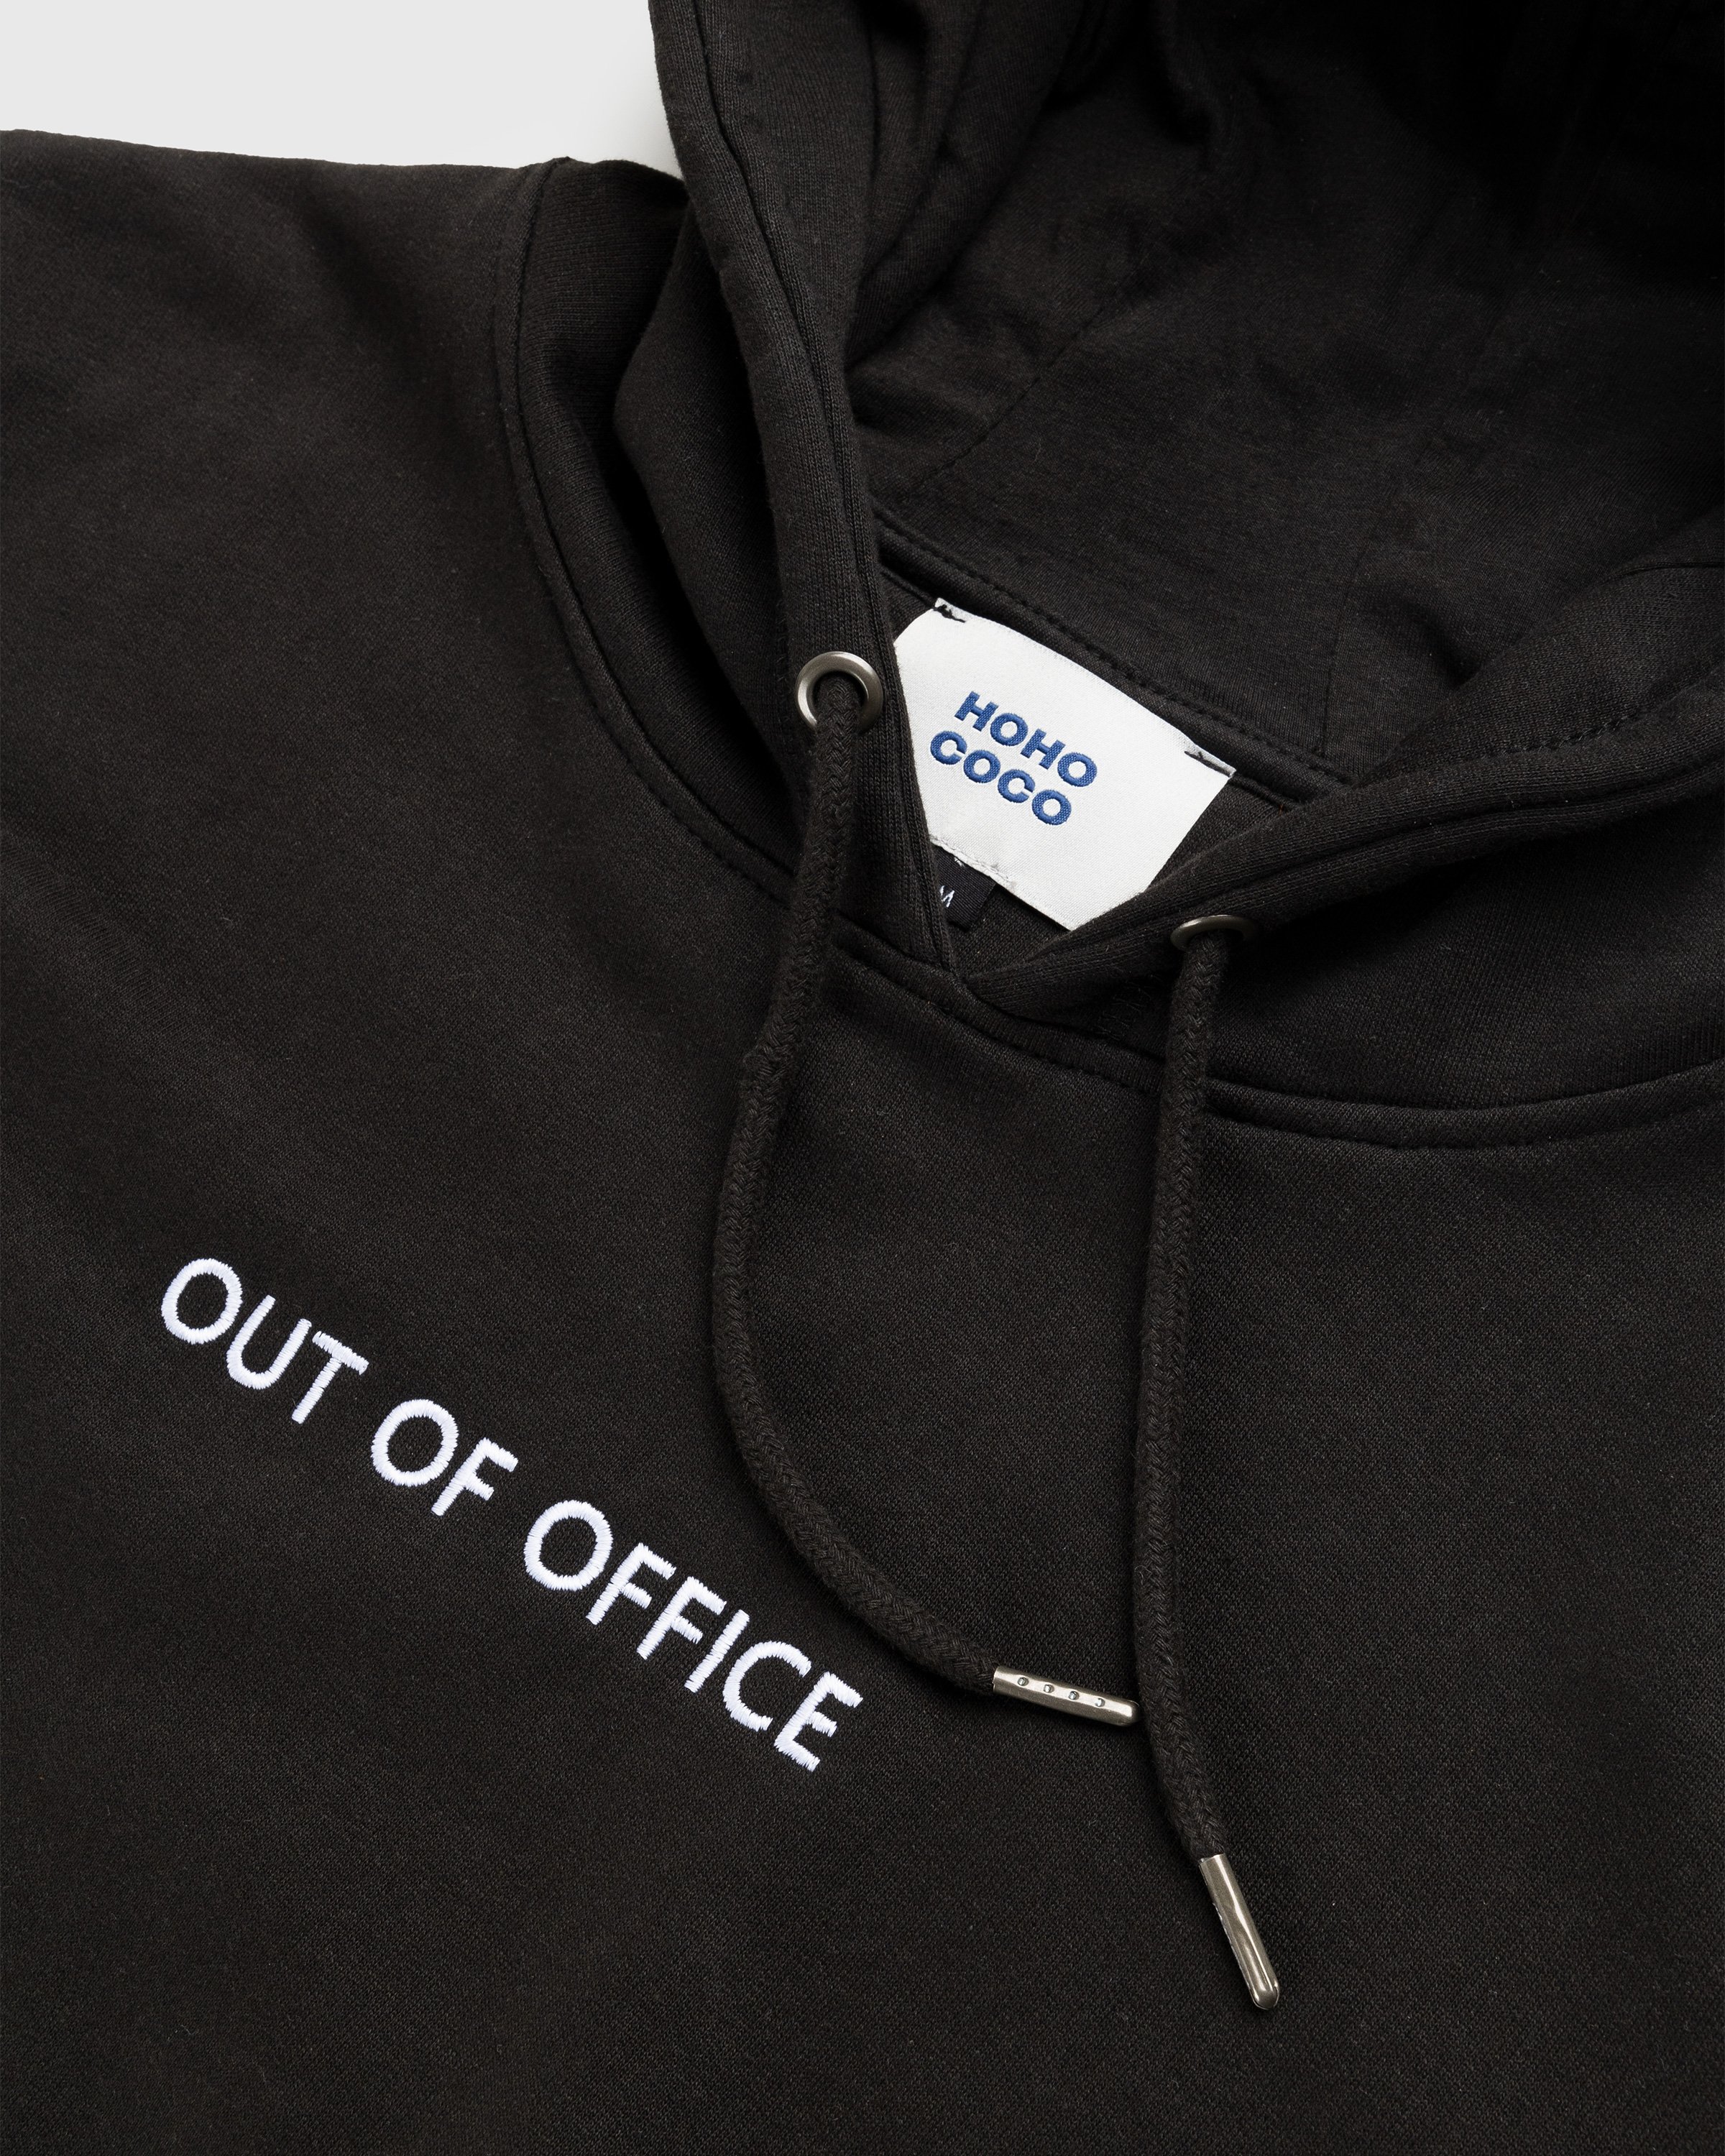 HO HO COCO - Out Of Office Hoodie Black - Clothing - Black - Image 3